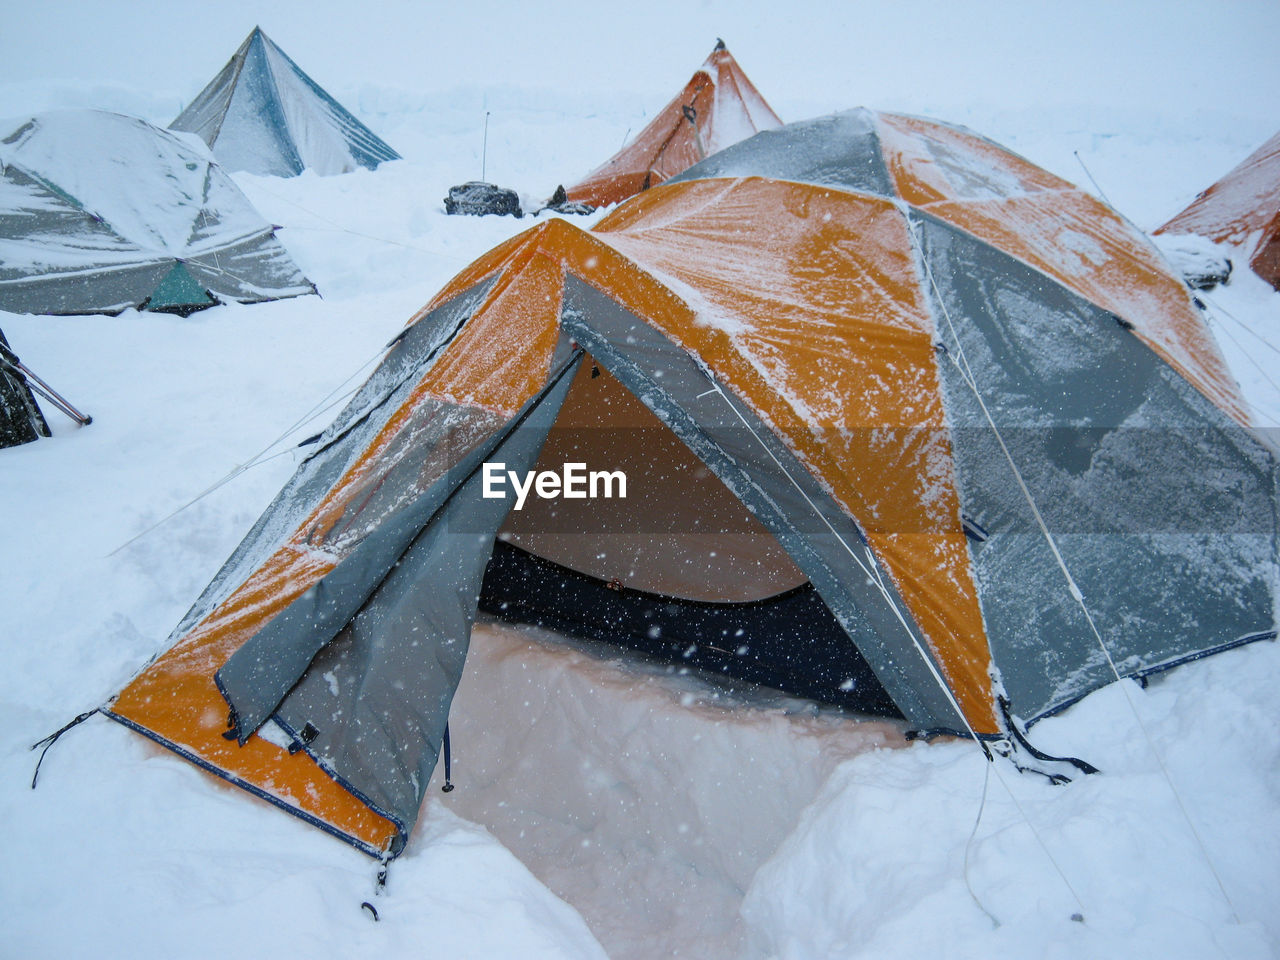 Returning home to mountaineering tent at denali basecamp in snowstorm on kahiltna glacier, alaska